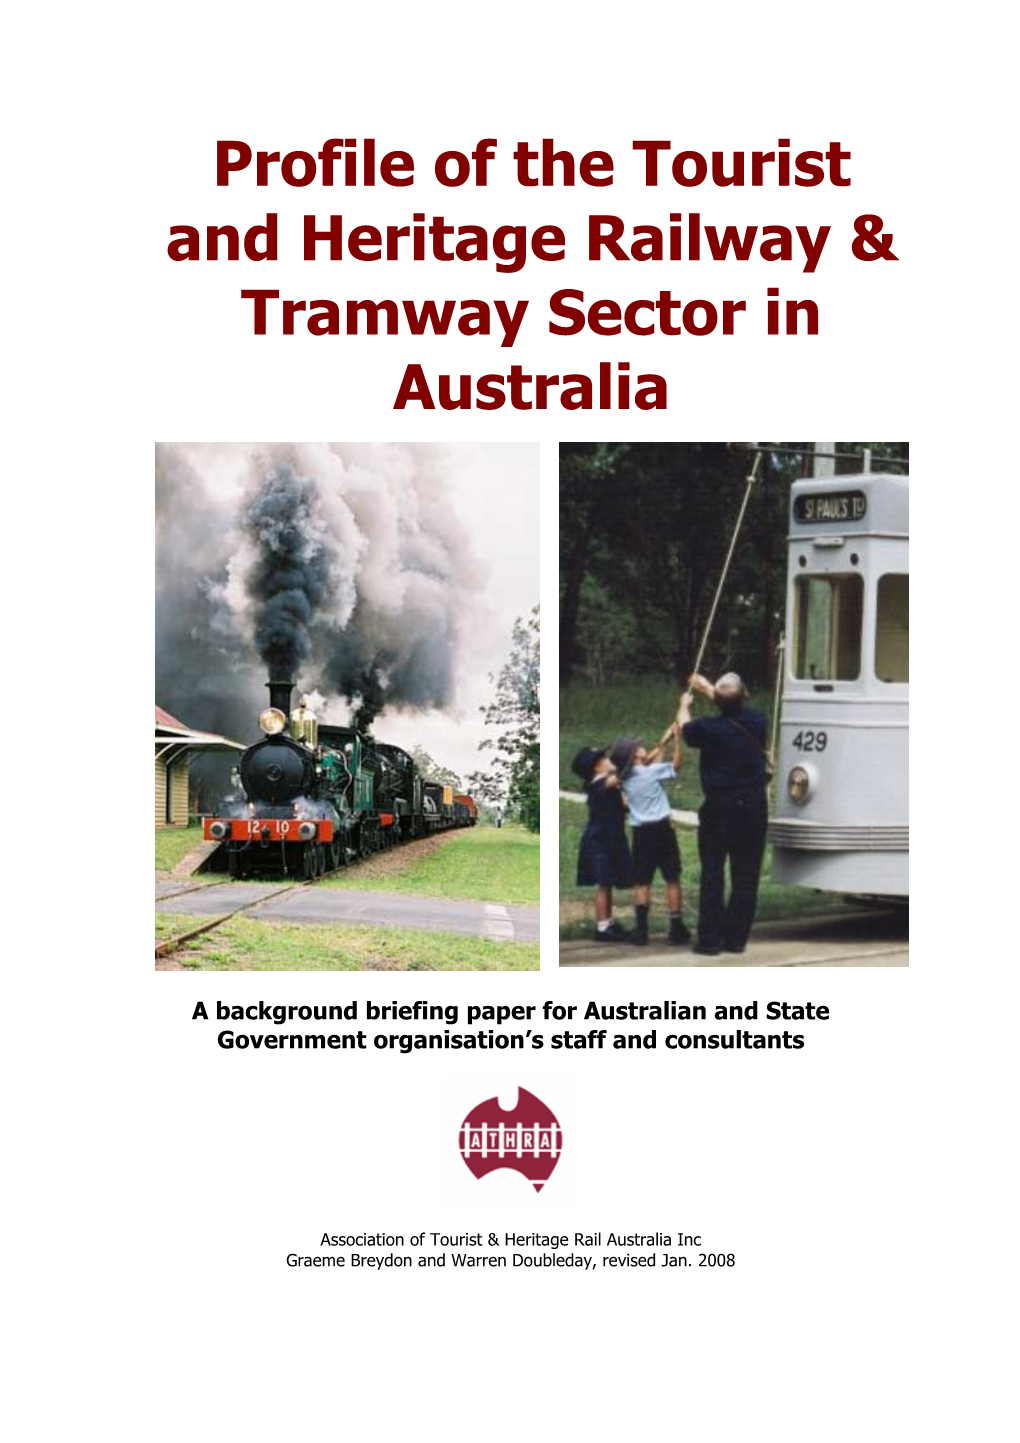 Profile of the Tourist and Heritage Railway & Tramway Sector In